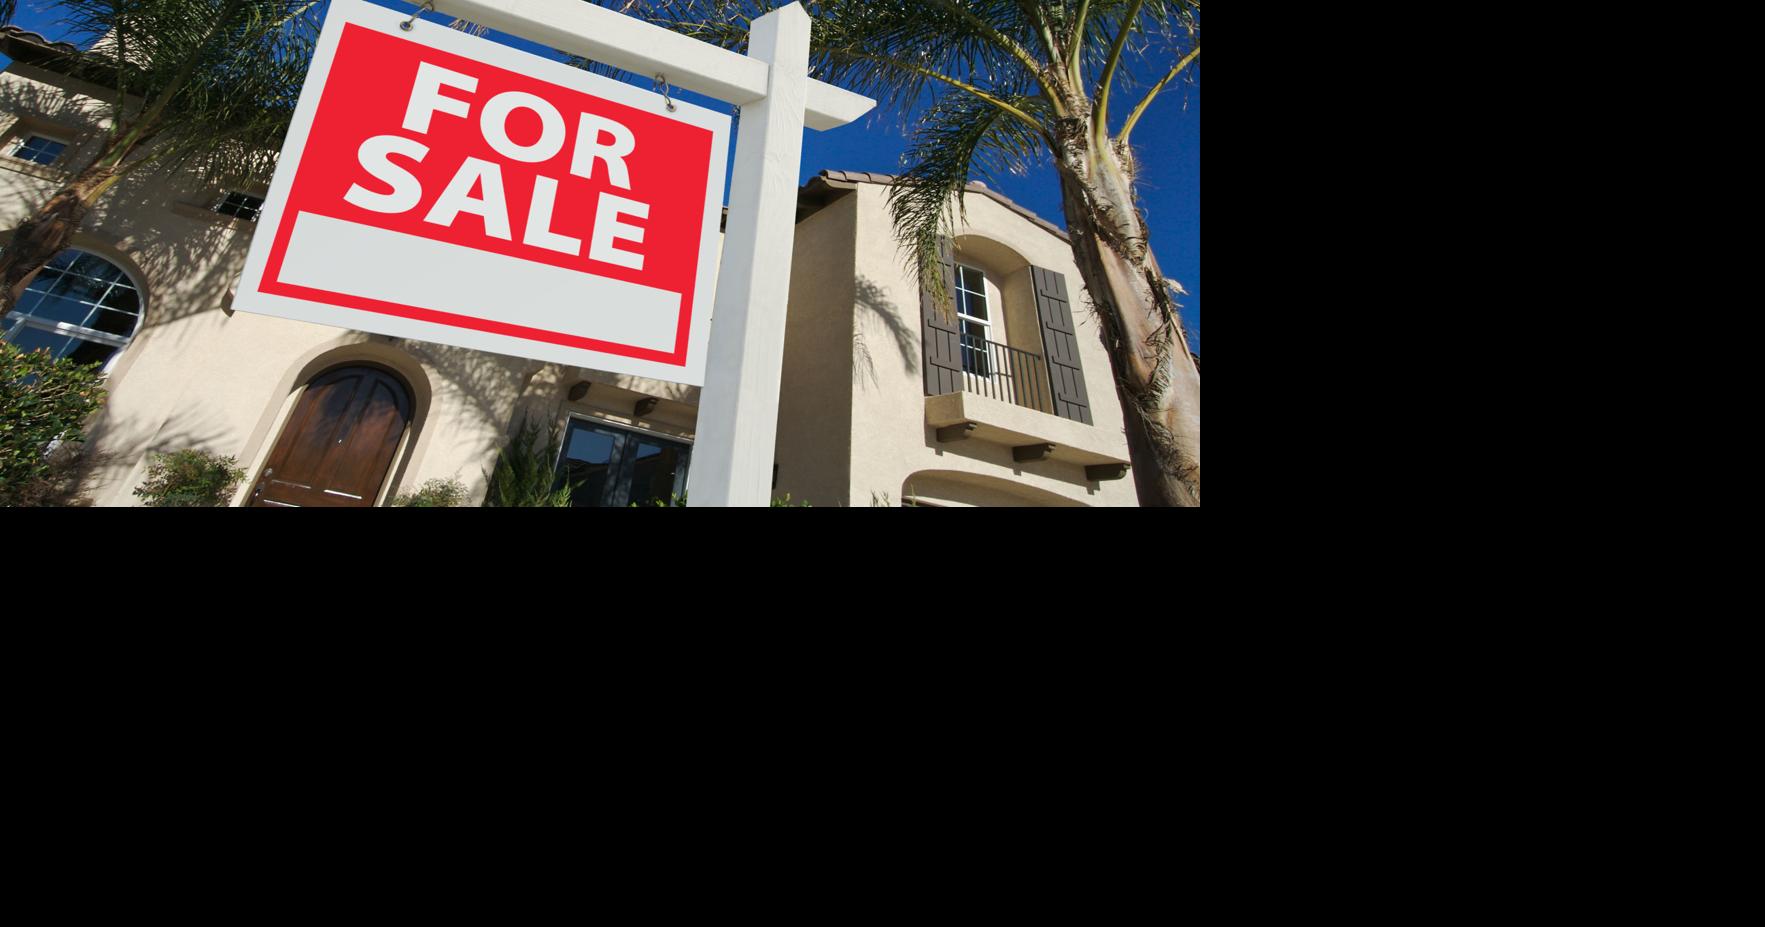 St. Tammany property transfers, May 3-9, 2022: See a list of home and other sales